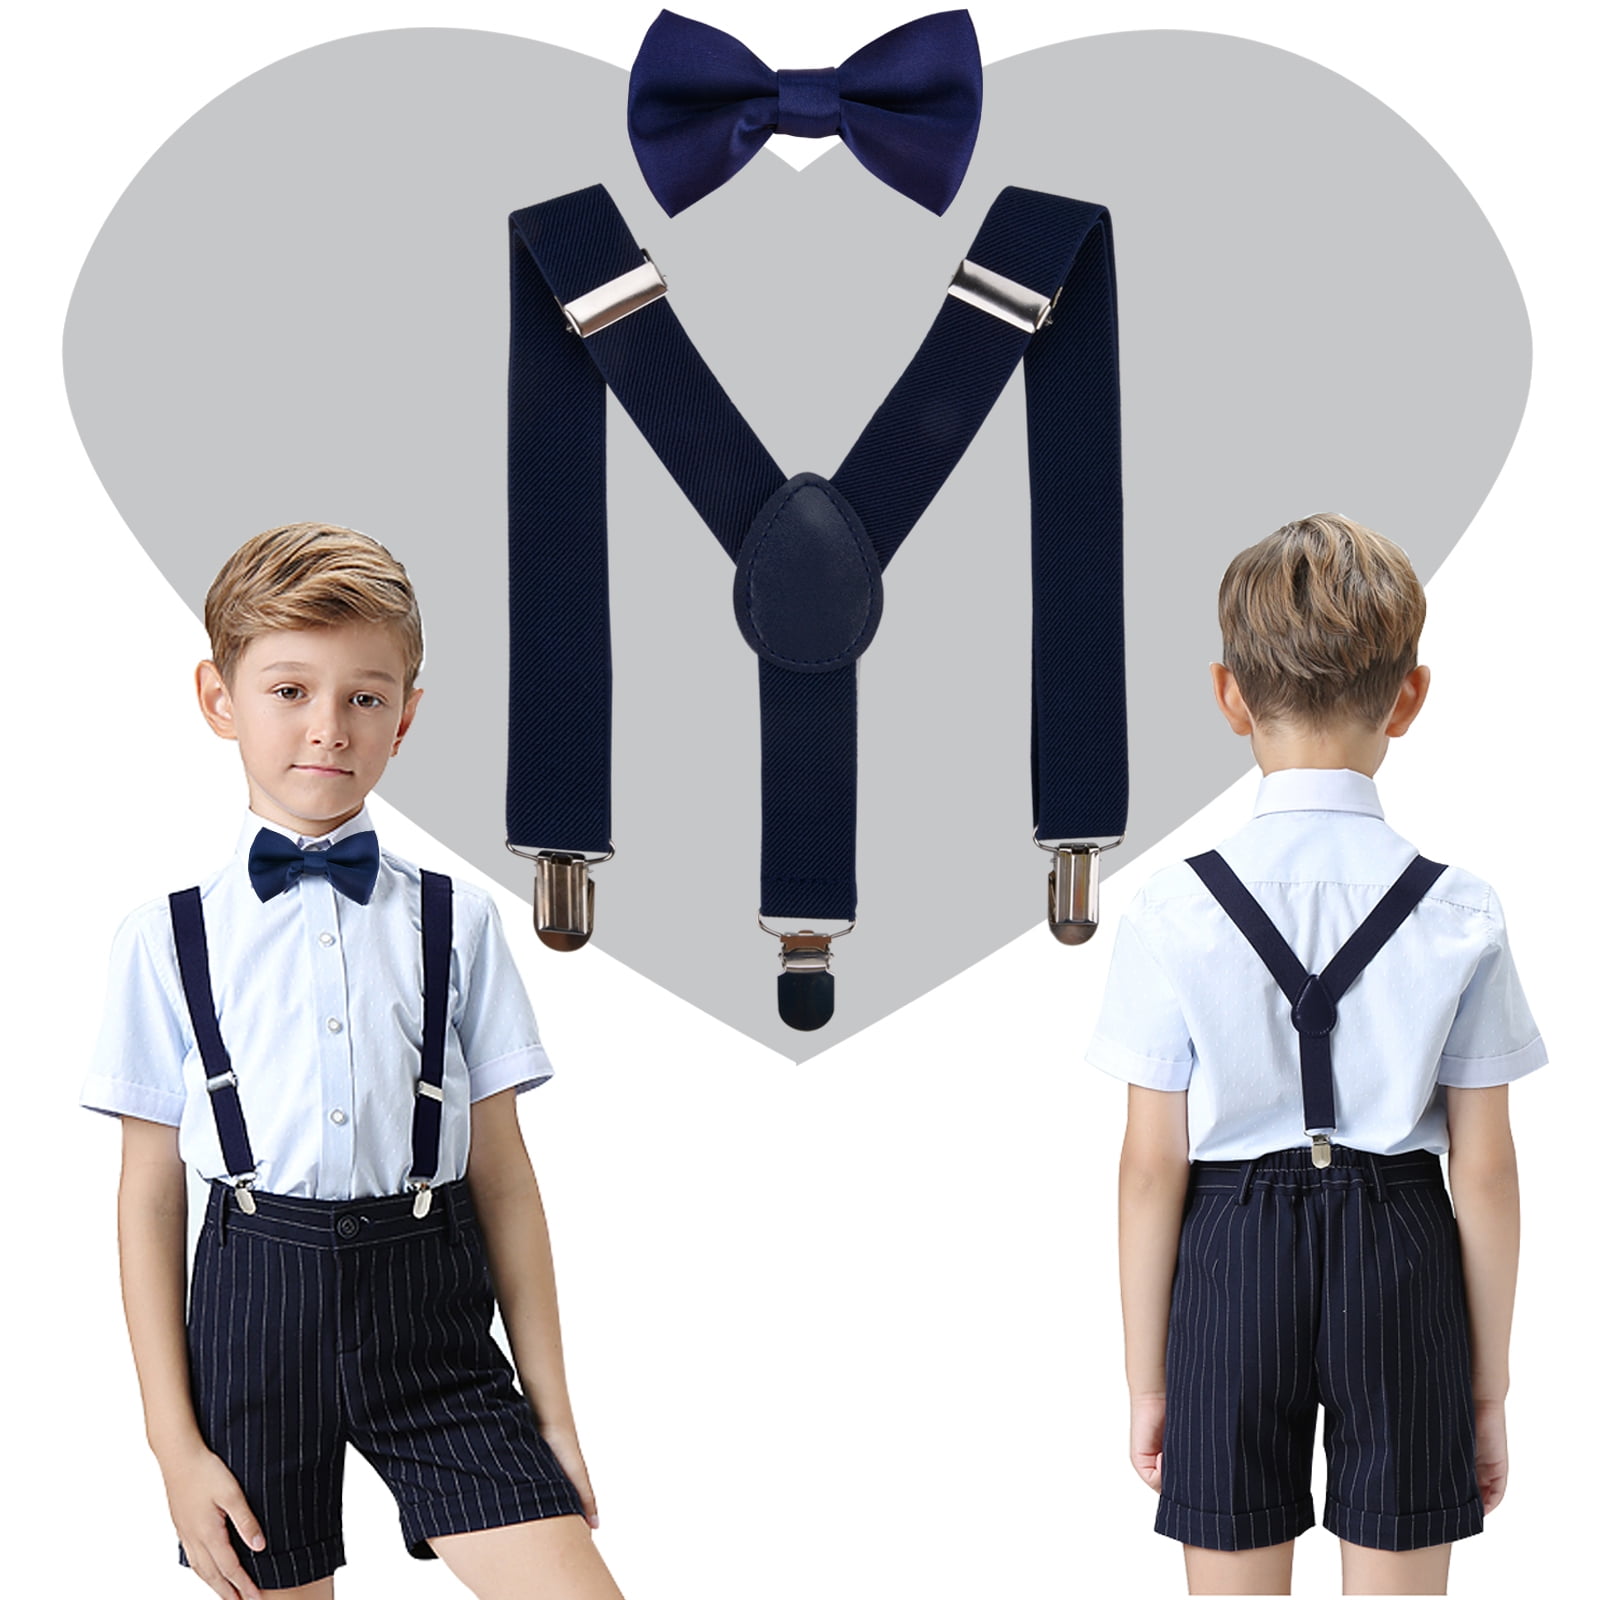 Unisex Kid Girl Boy Elastic Suspenders Bowtie Bow Tie Set Birthday Childrens Day Gift for 1-10 Year Old Kids Daily Wear Attending Wedding Party